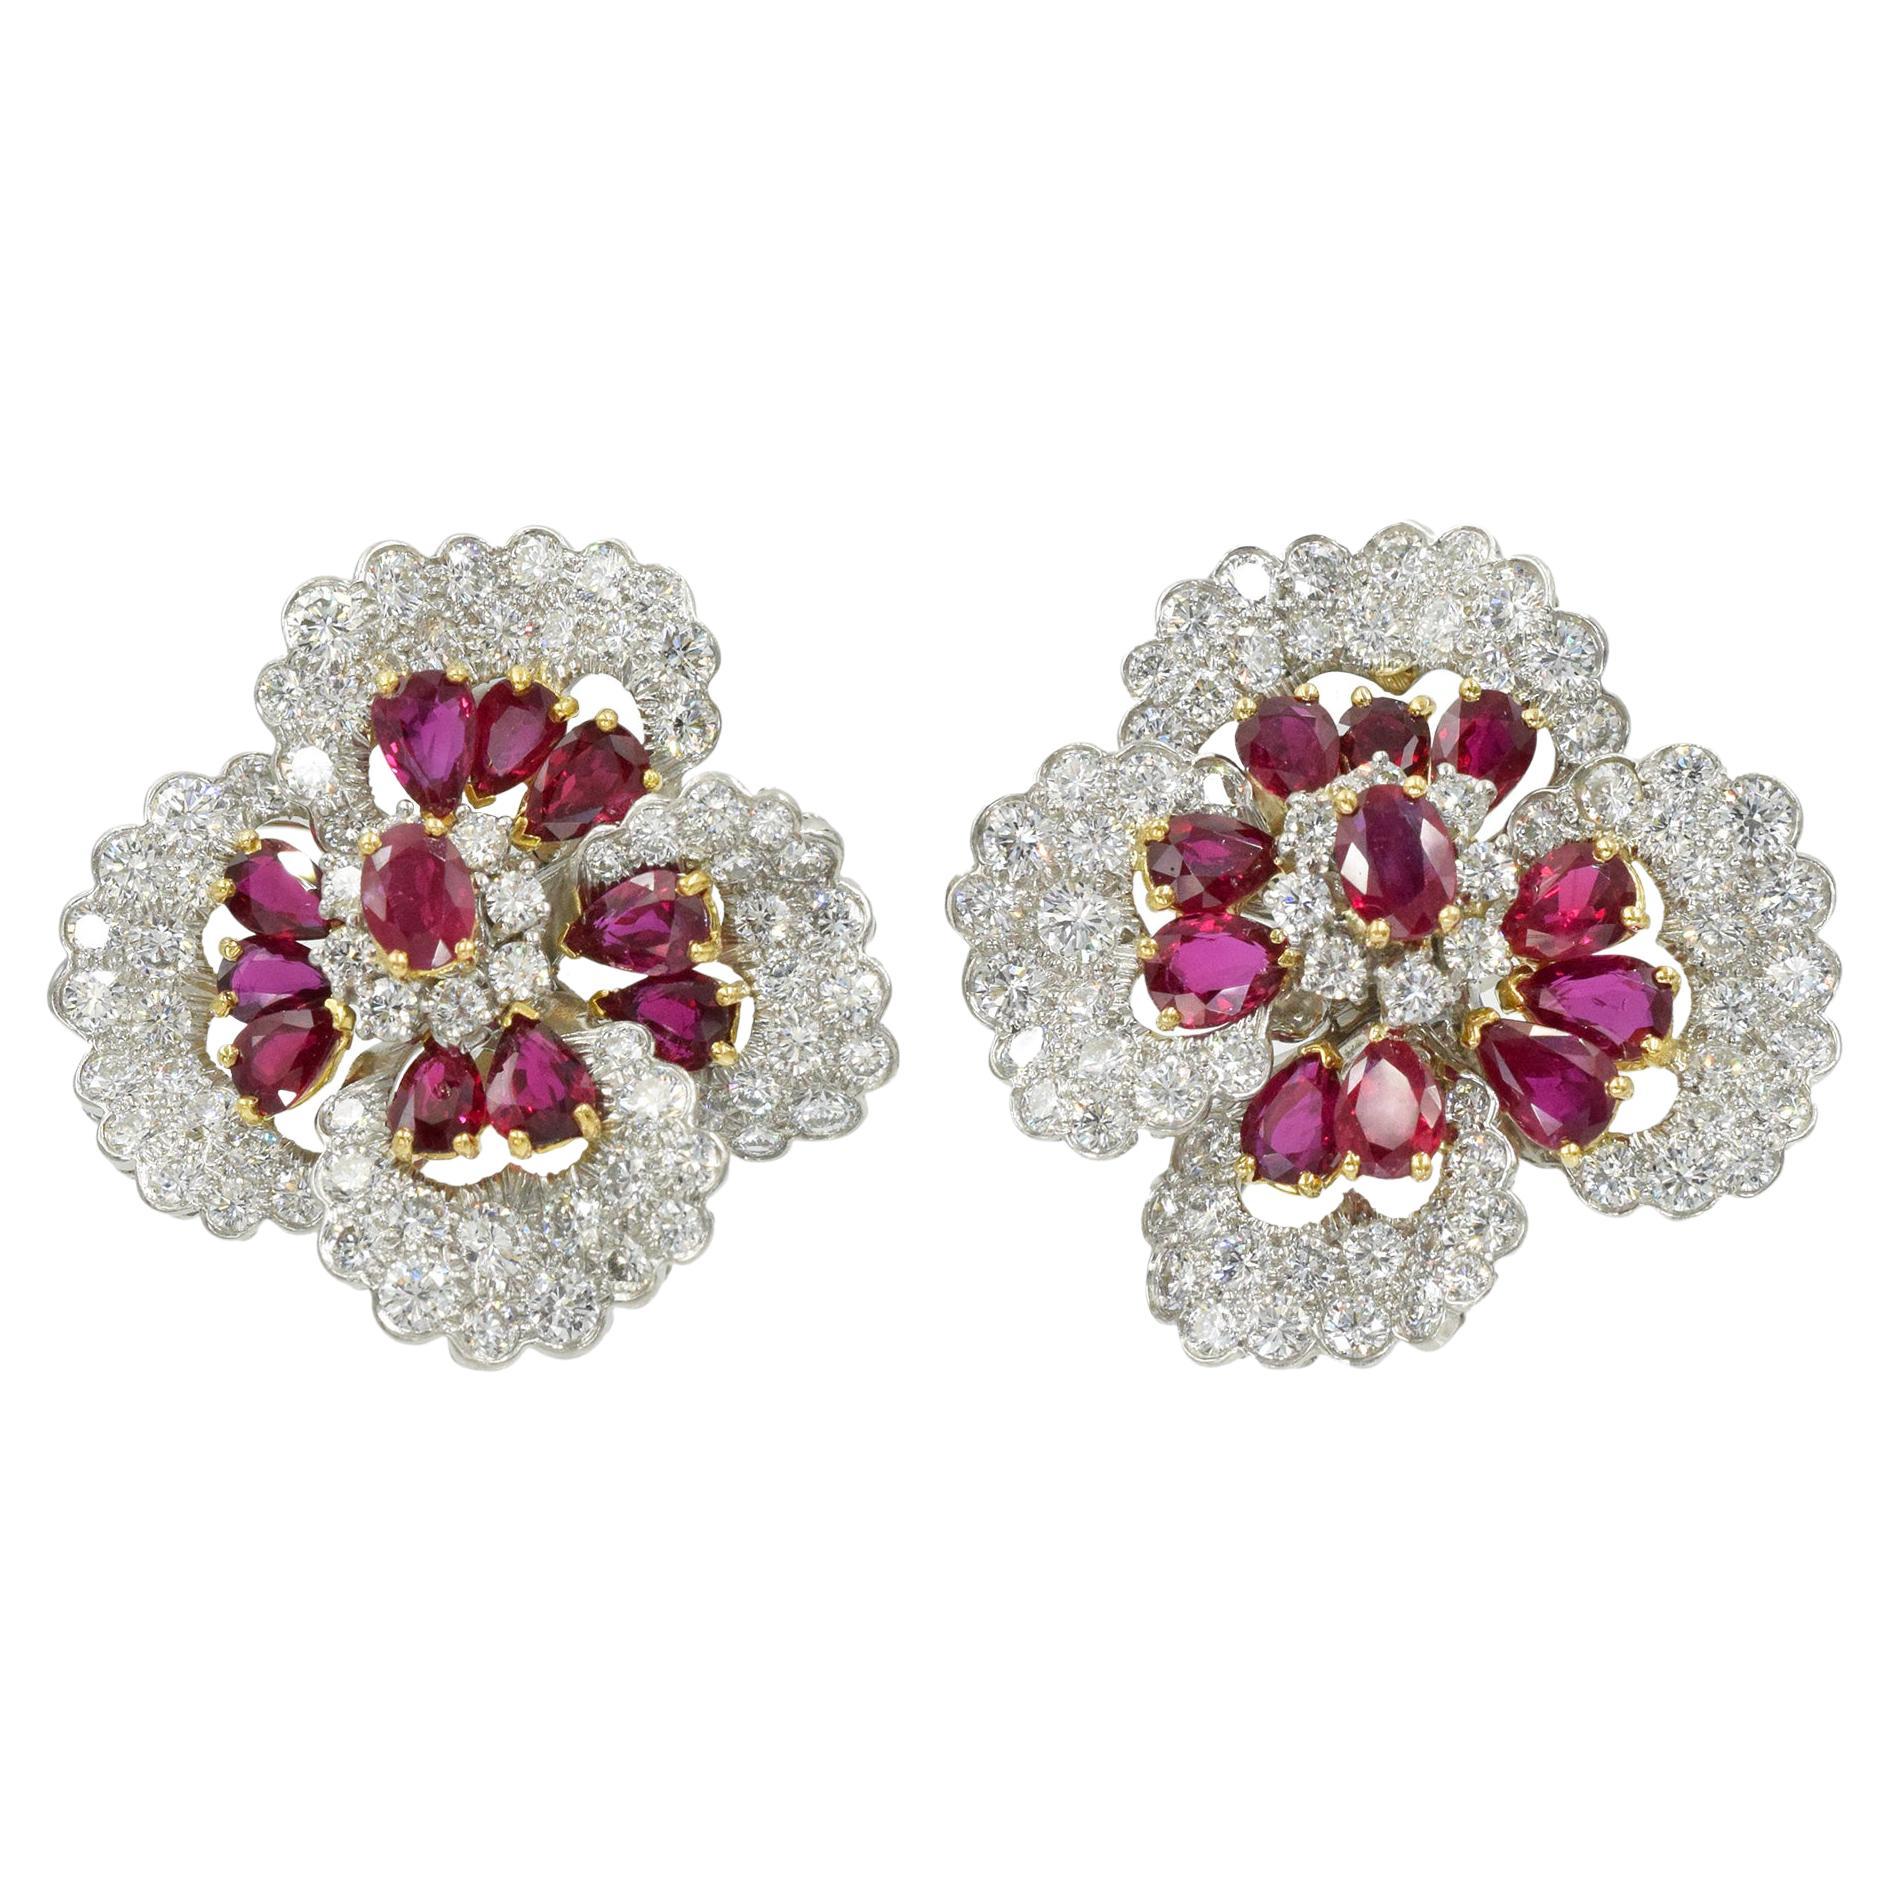 Oscar Heyman diamond and ruby earrings. This pair of earrings has 22 rubies approximately 7-8 carats and 144 diamonds total weight approximately 16- 17 carats top quality diamonds
 Color: E/F Clarity: VVS  set in platinum and numbered xxxxxxx
. 